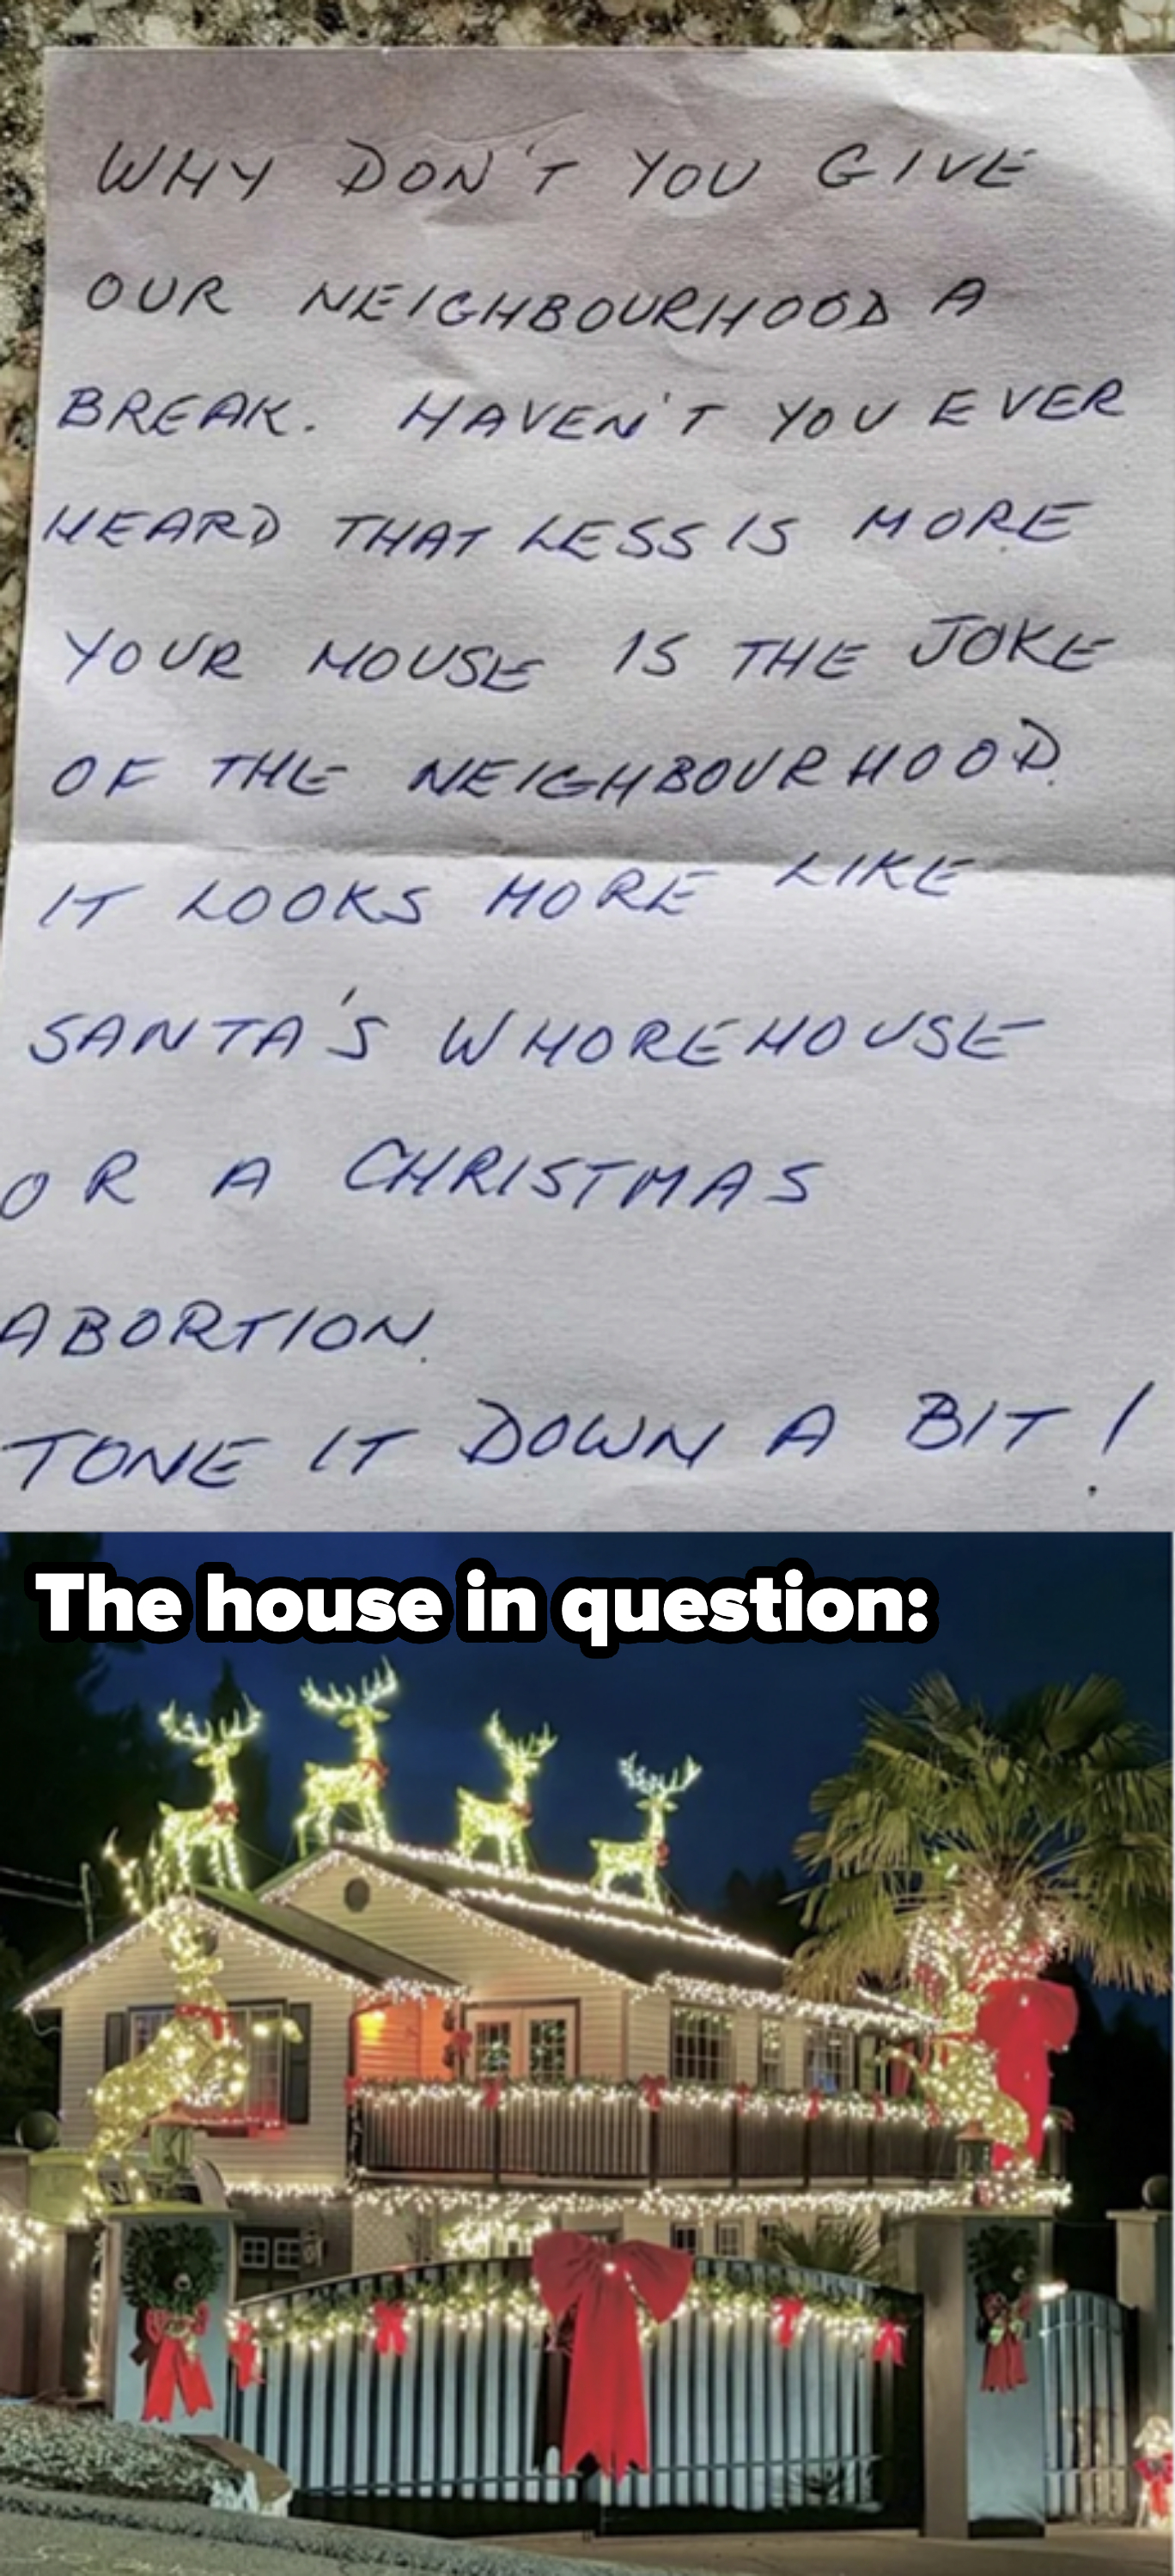 havent&#x27; you ever heard less is more note left on a house decorated with christmas lights